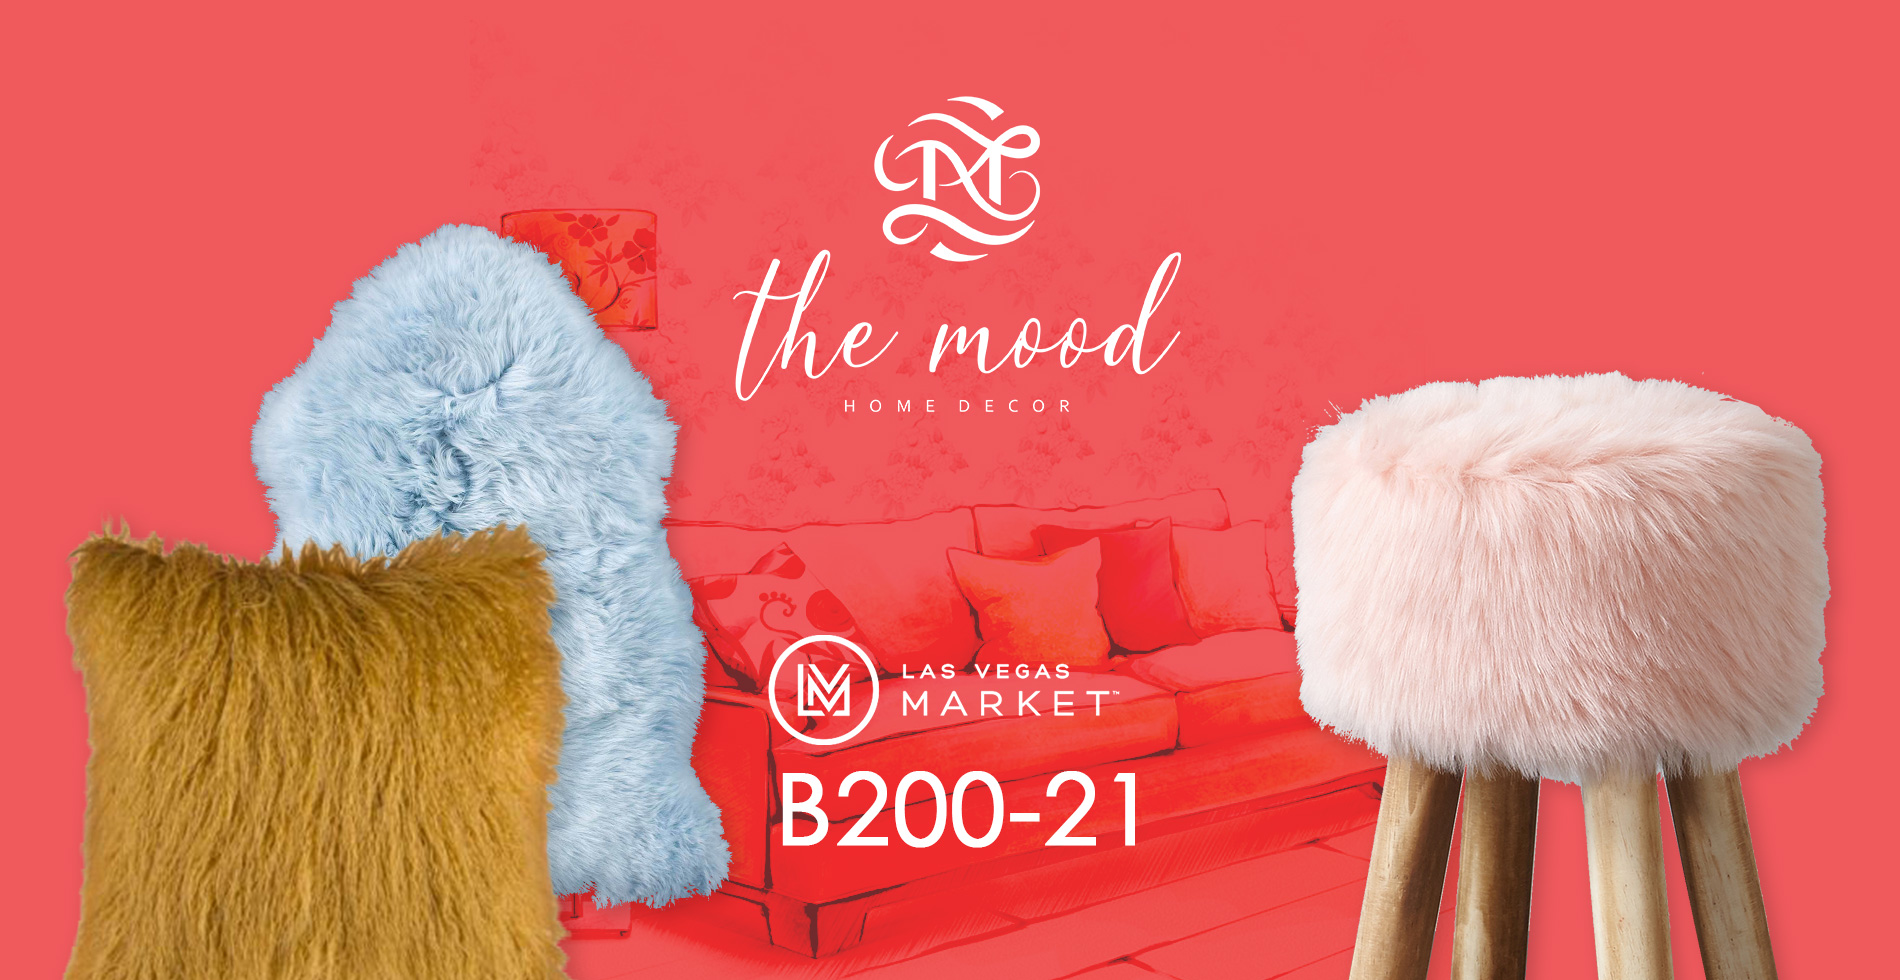 The Mood featured sheepskin rugs and pillows at B200-21 Las Vegas Market 2019